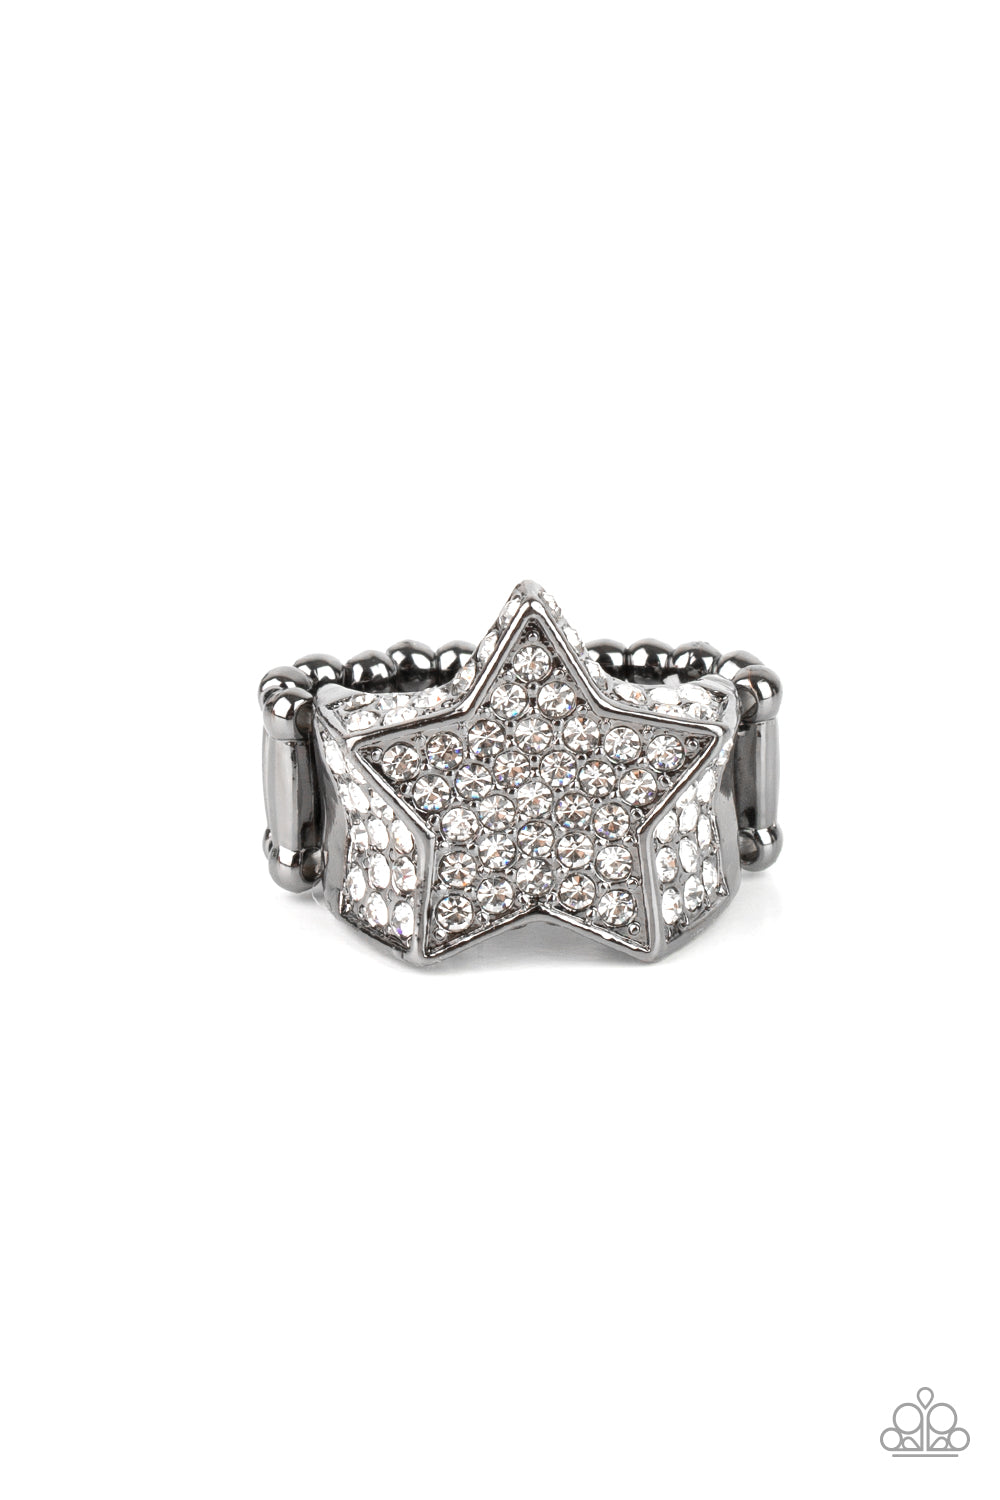 Encrusted in glittery white rhinestones, a sparkly gunmetal star joins with a thick band of blinding white rhinestones. The edges of the star are embellished in additional white rhinestones, creating a stellar centerpiece atop the finger. Features a stretchy band for a flexible fit.